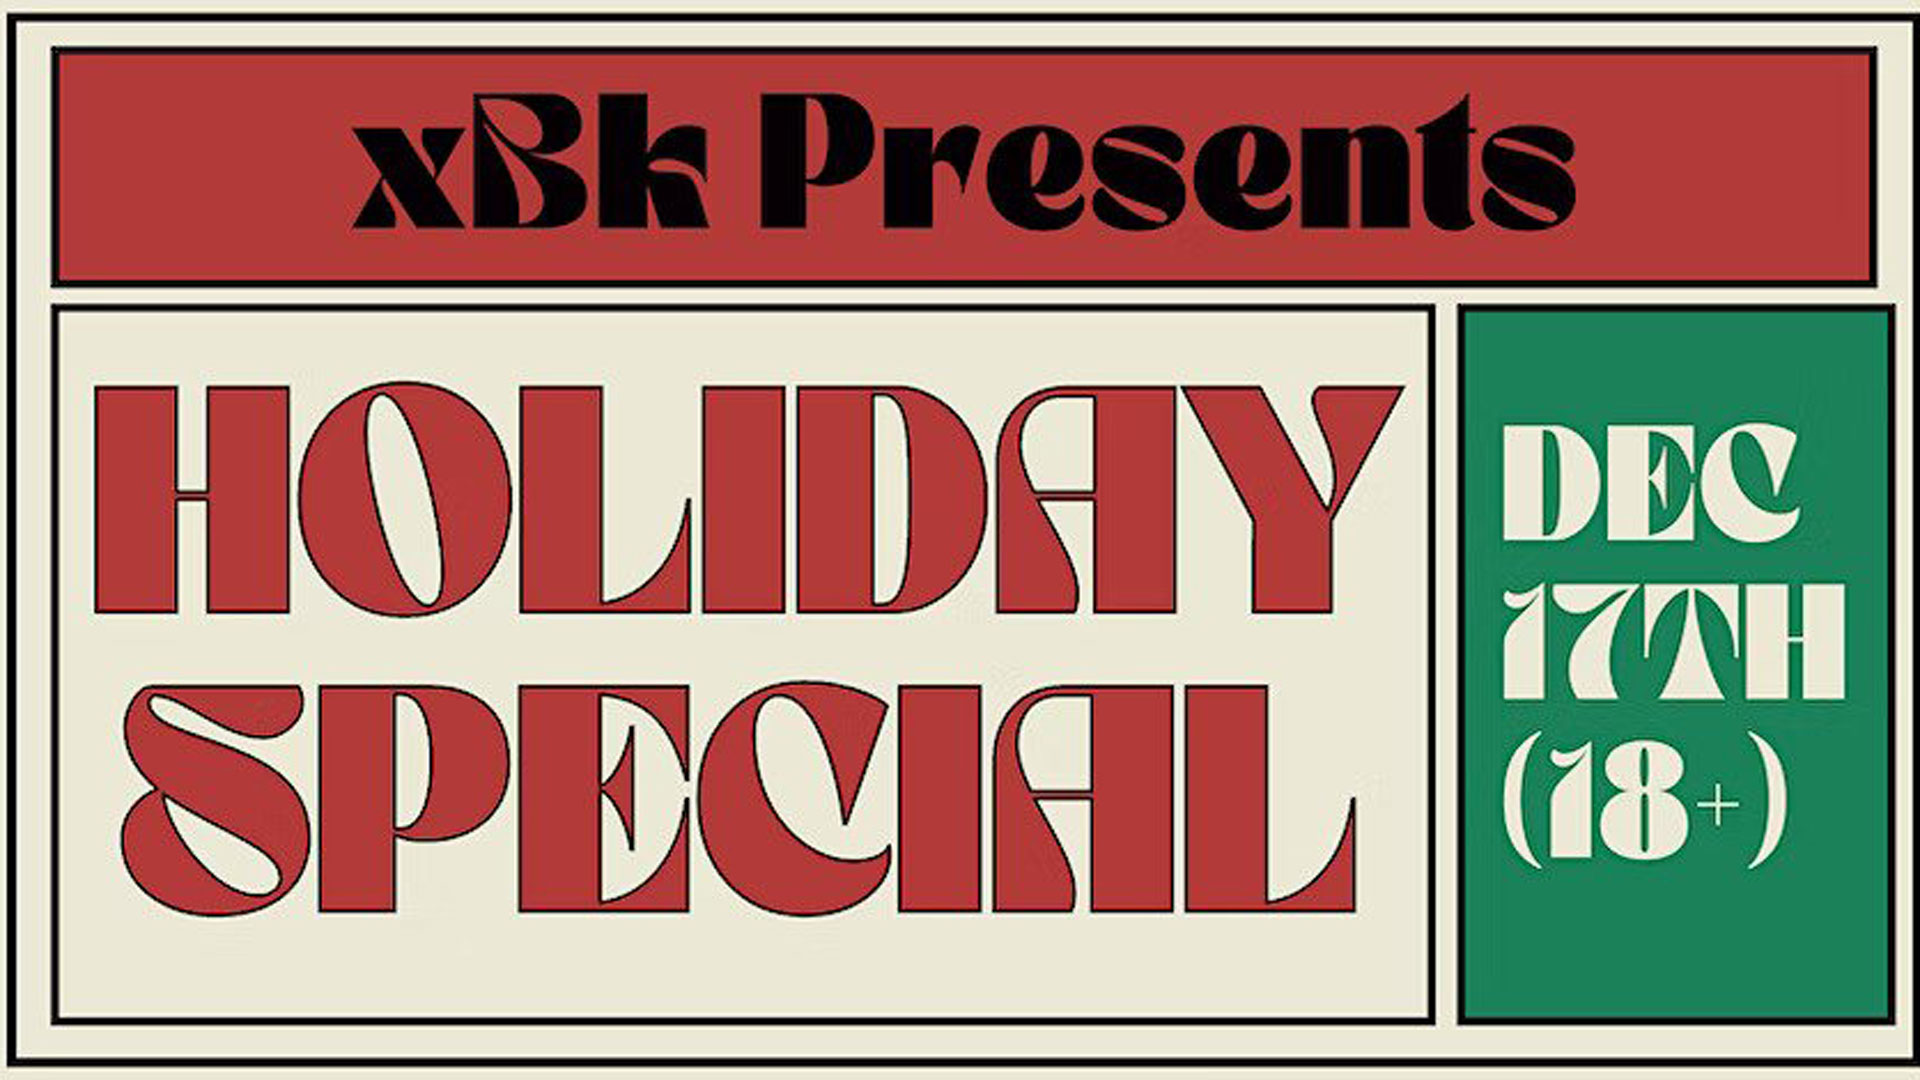 Live Local Loud Holiday Special at xBk December 17-18, 2022